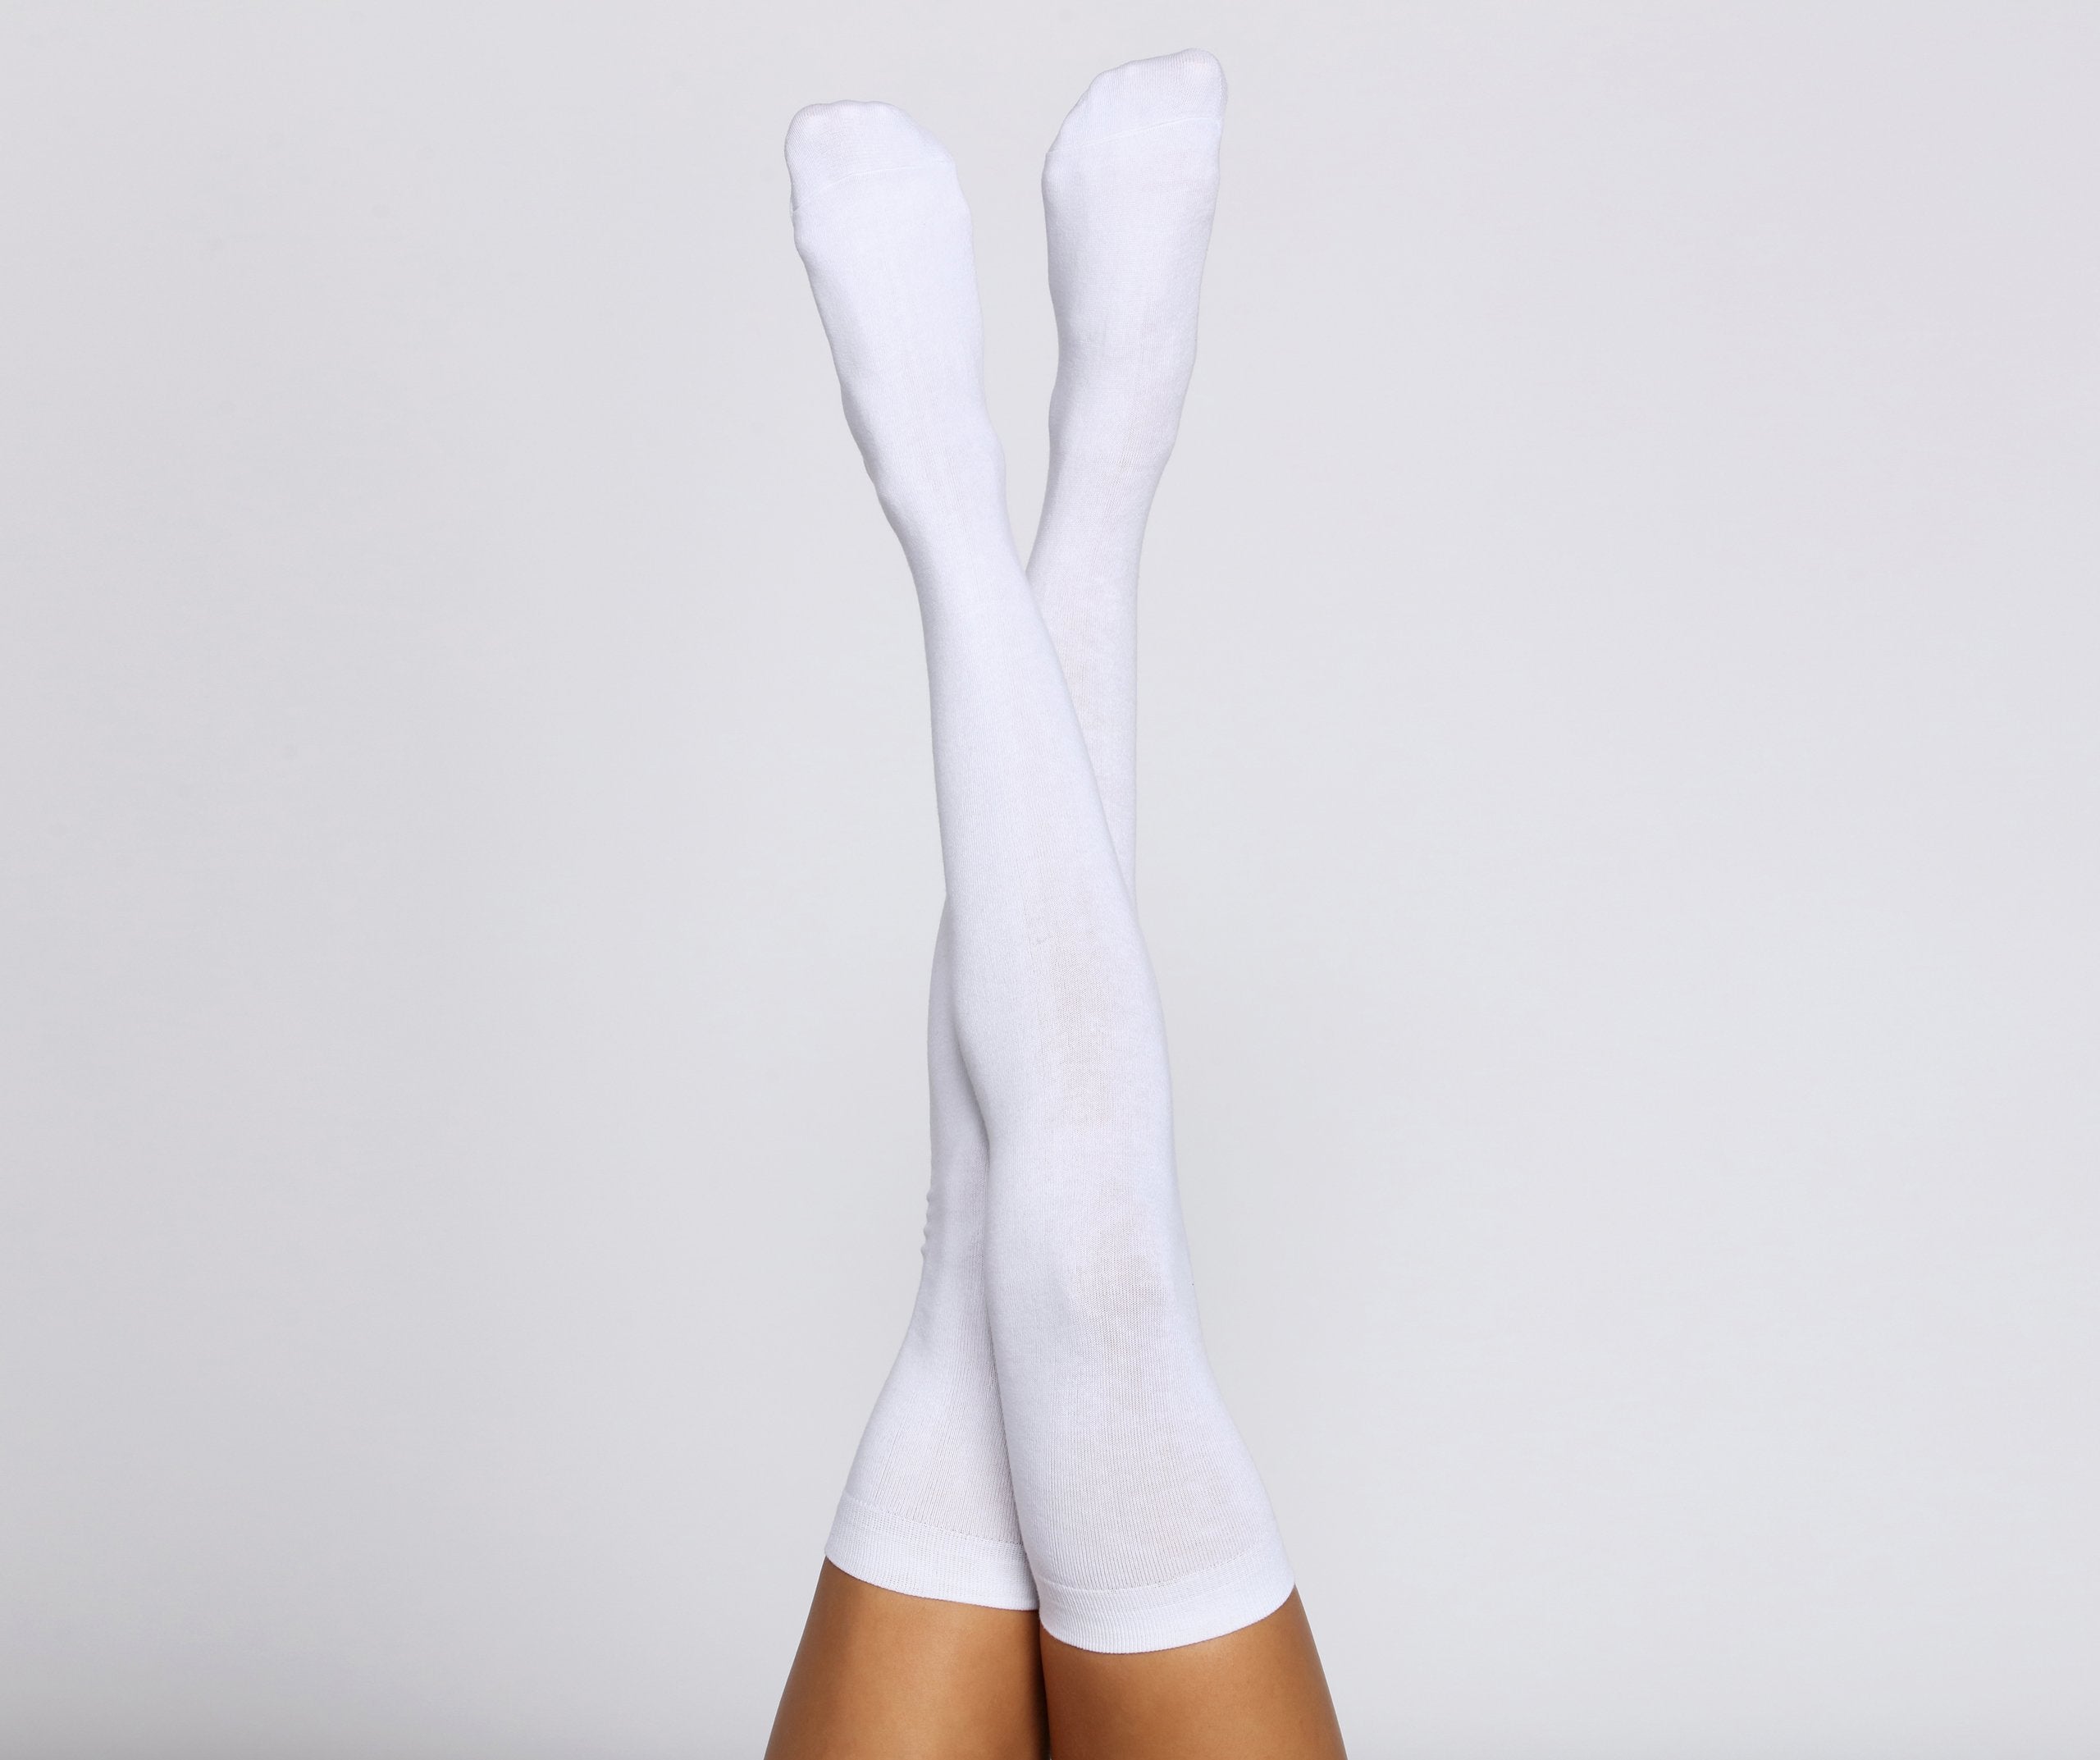 Thigh High Socks - Lady Occasions